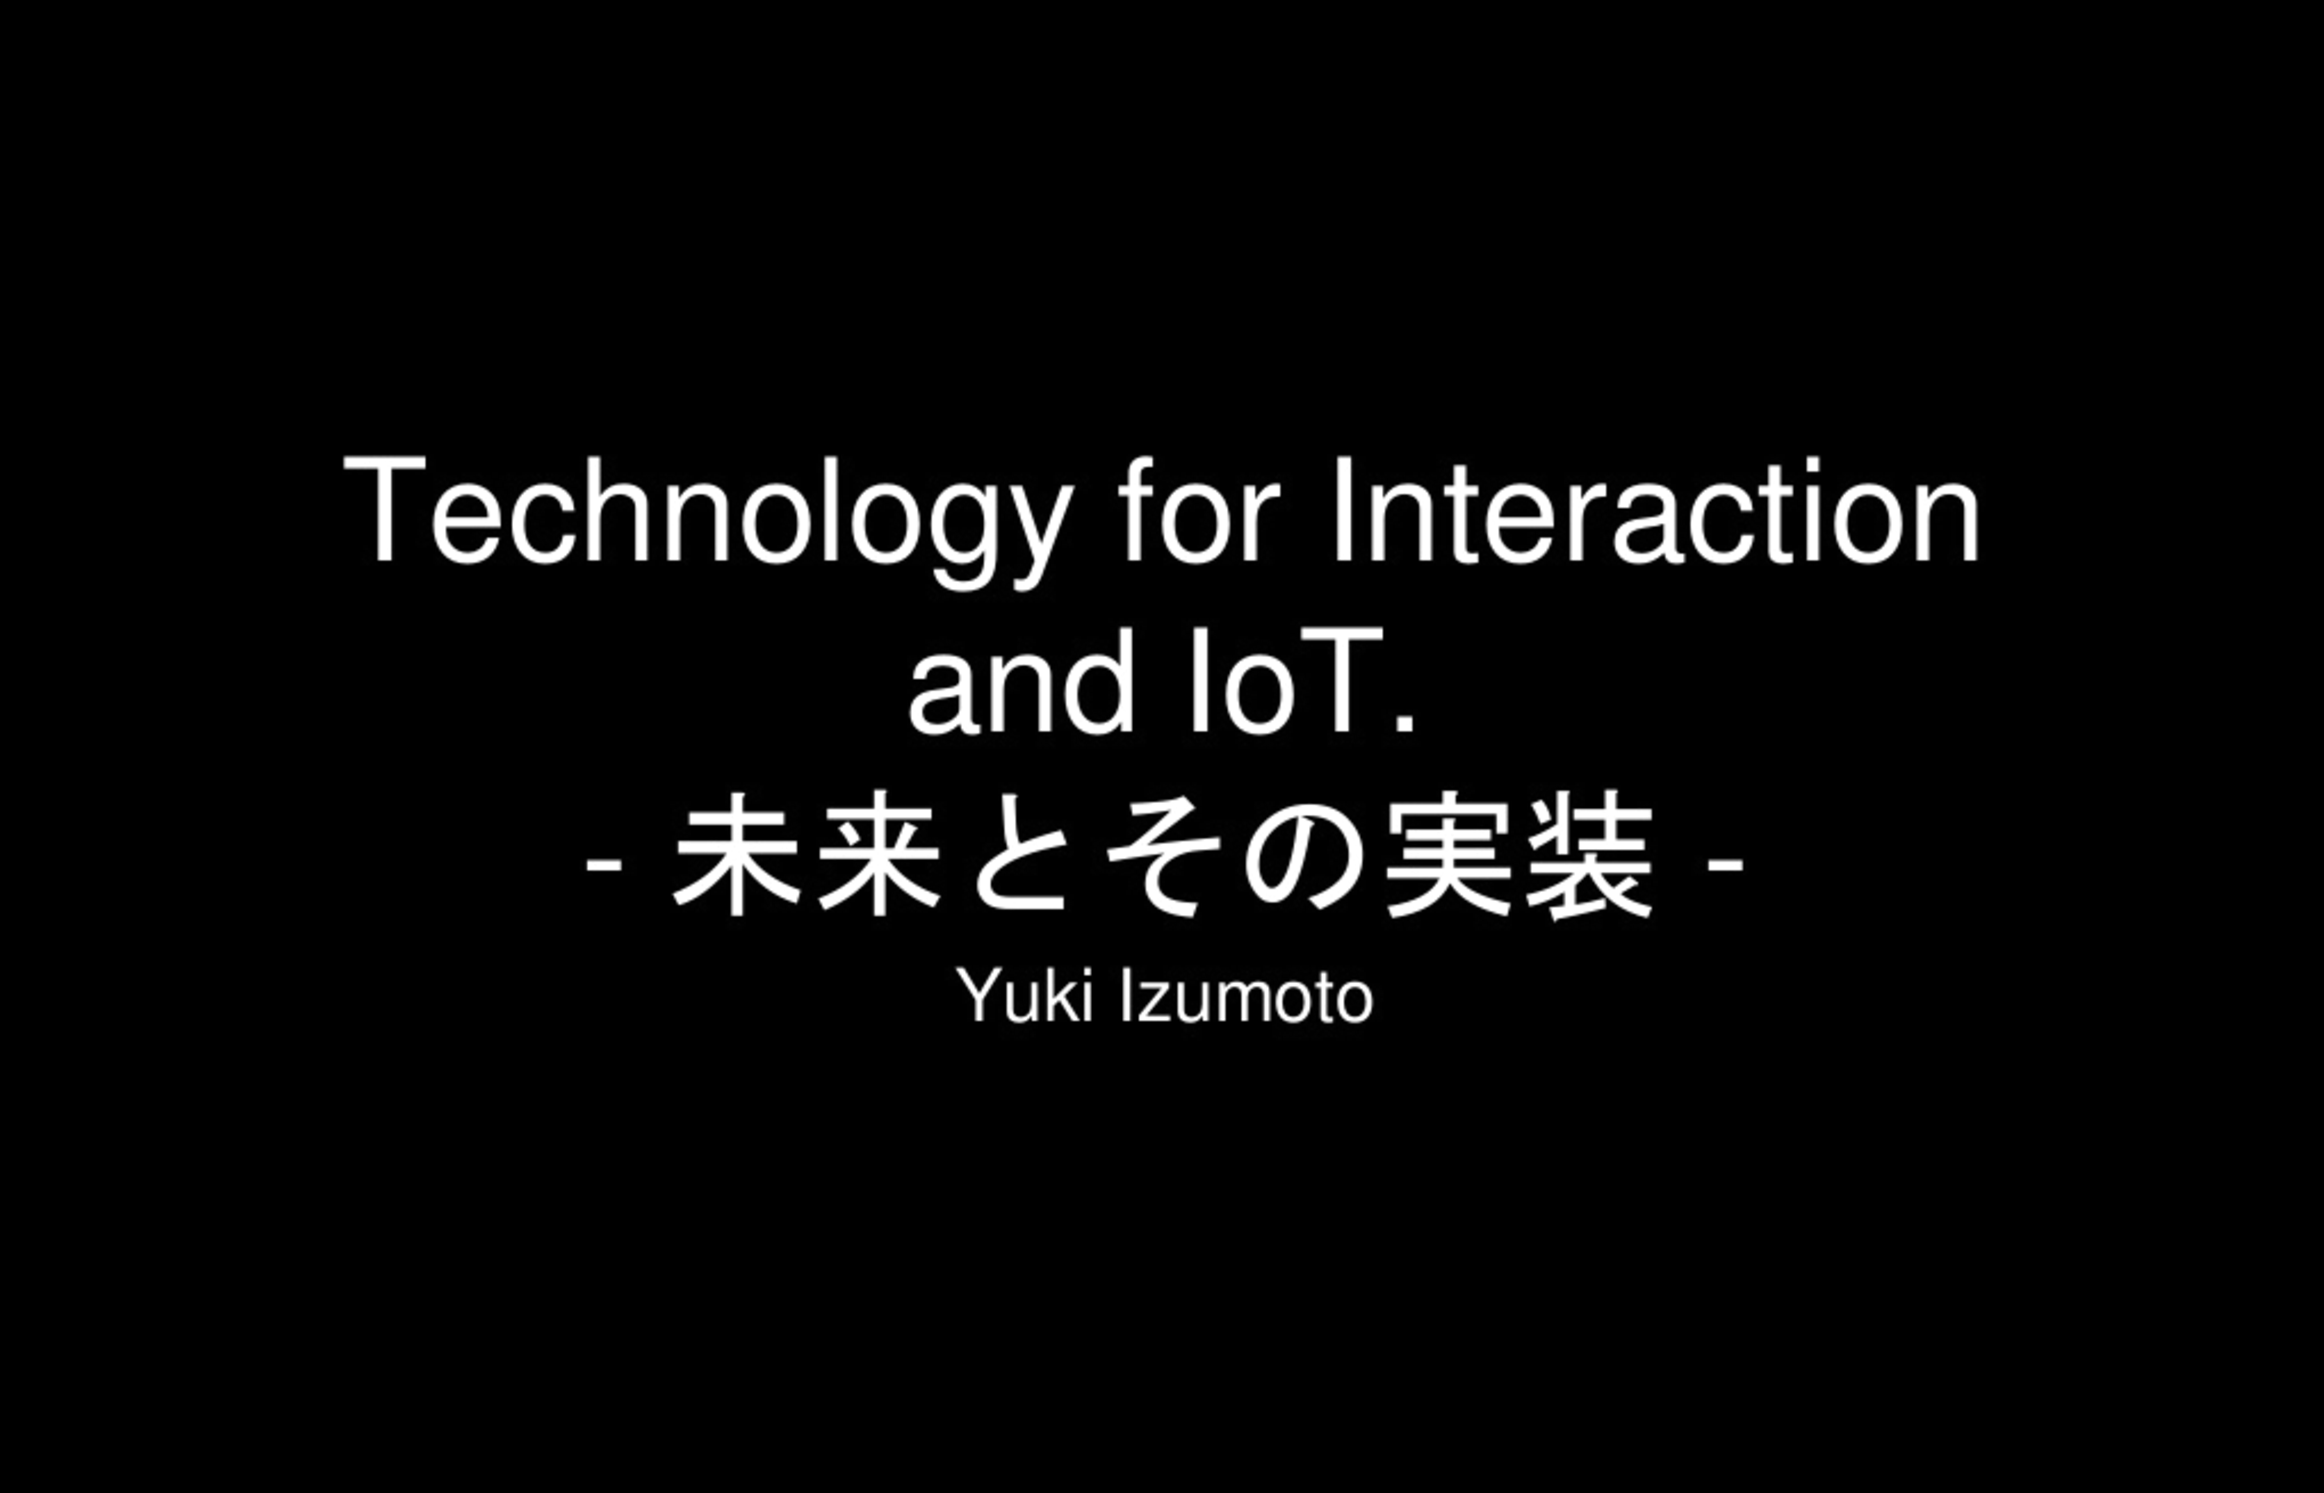 Technology for Interaction and IoT.